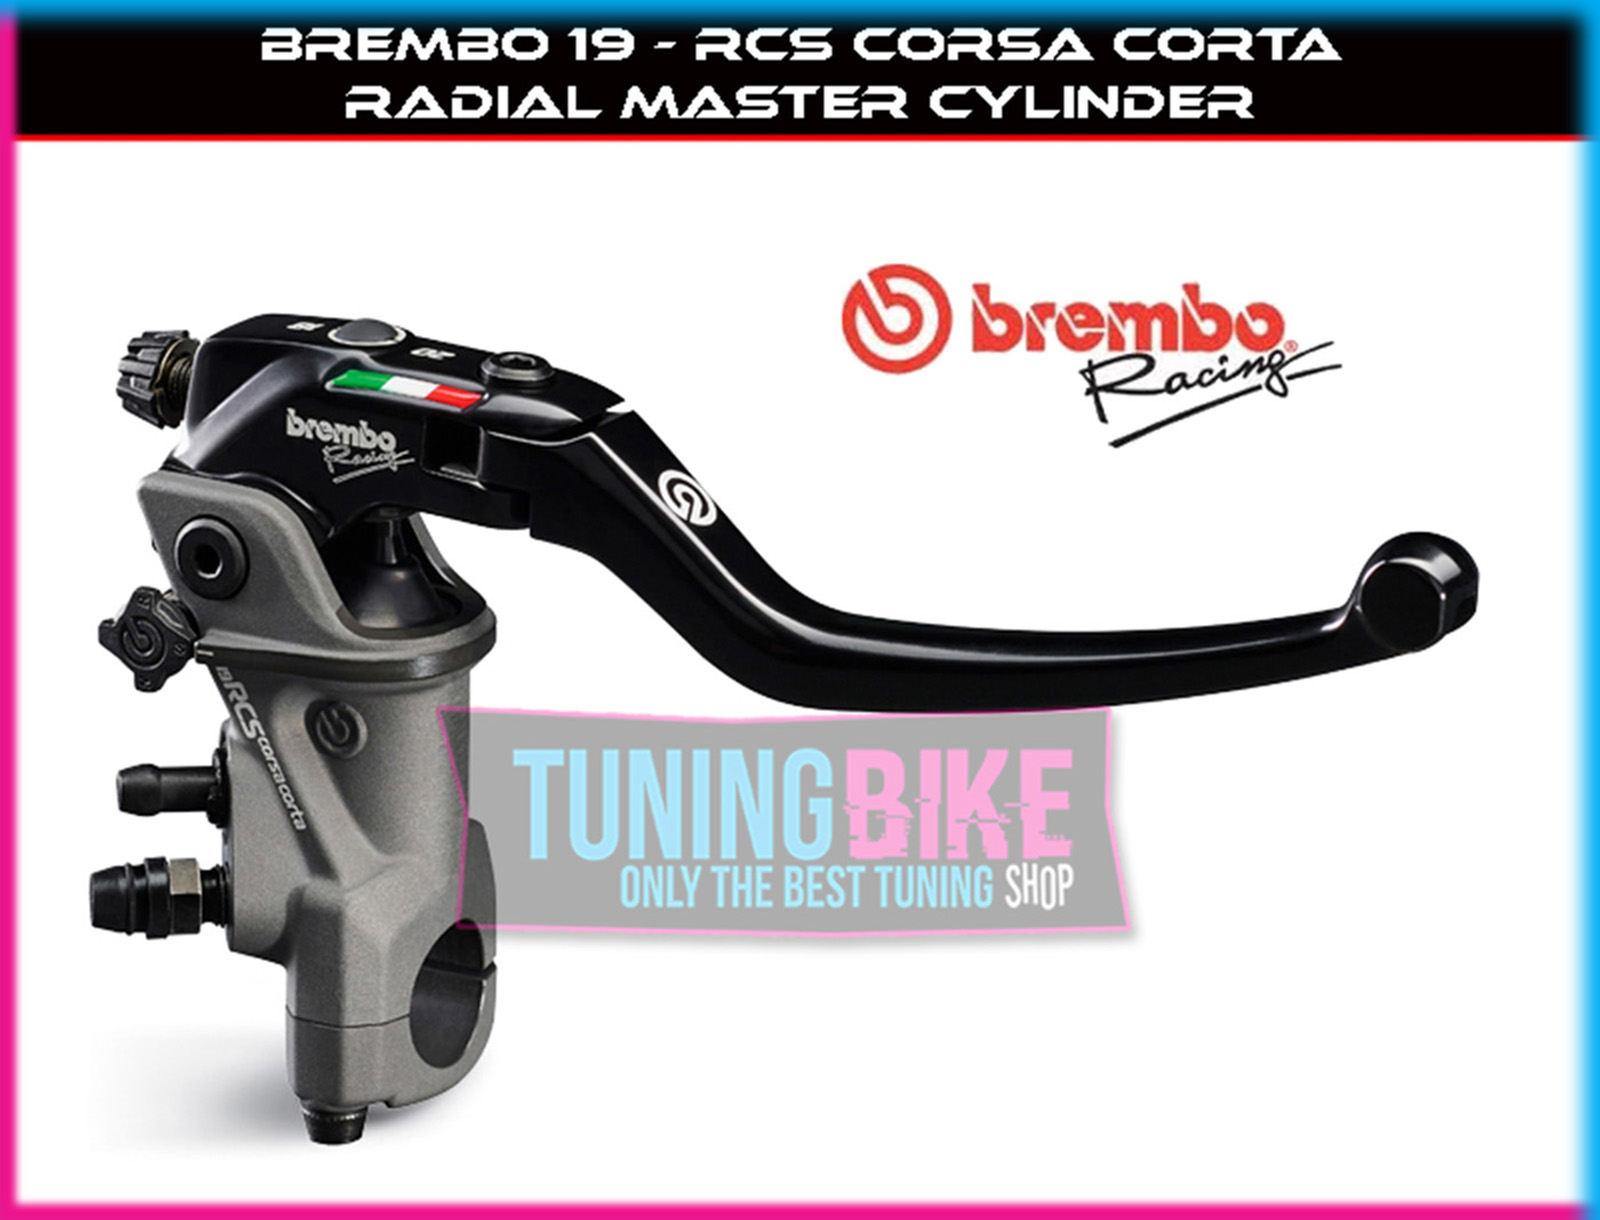 BREMBO RADIAL BRAKE MASTER CYLINDER 19RCS CORSACORTA FOR DUCATI 1199 PANIGALE 12'-14'